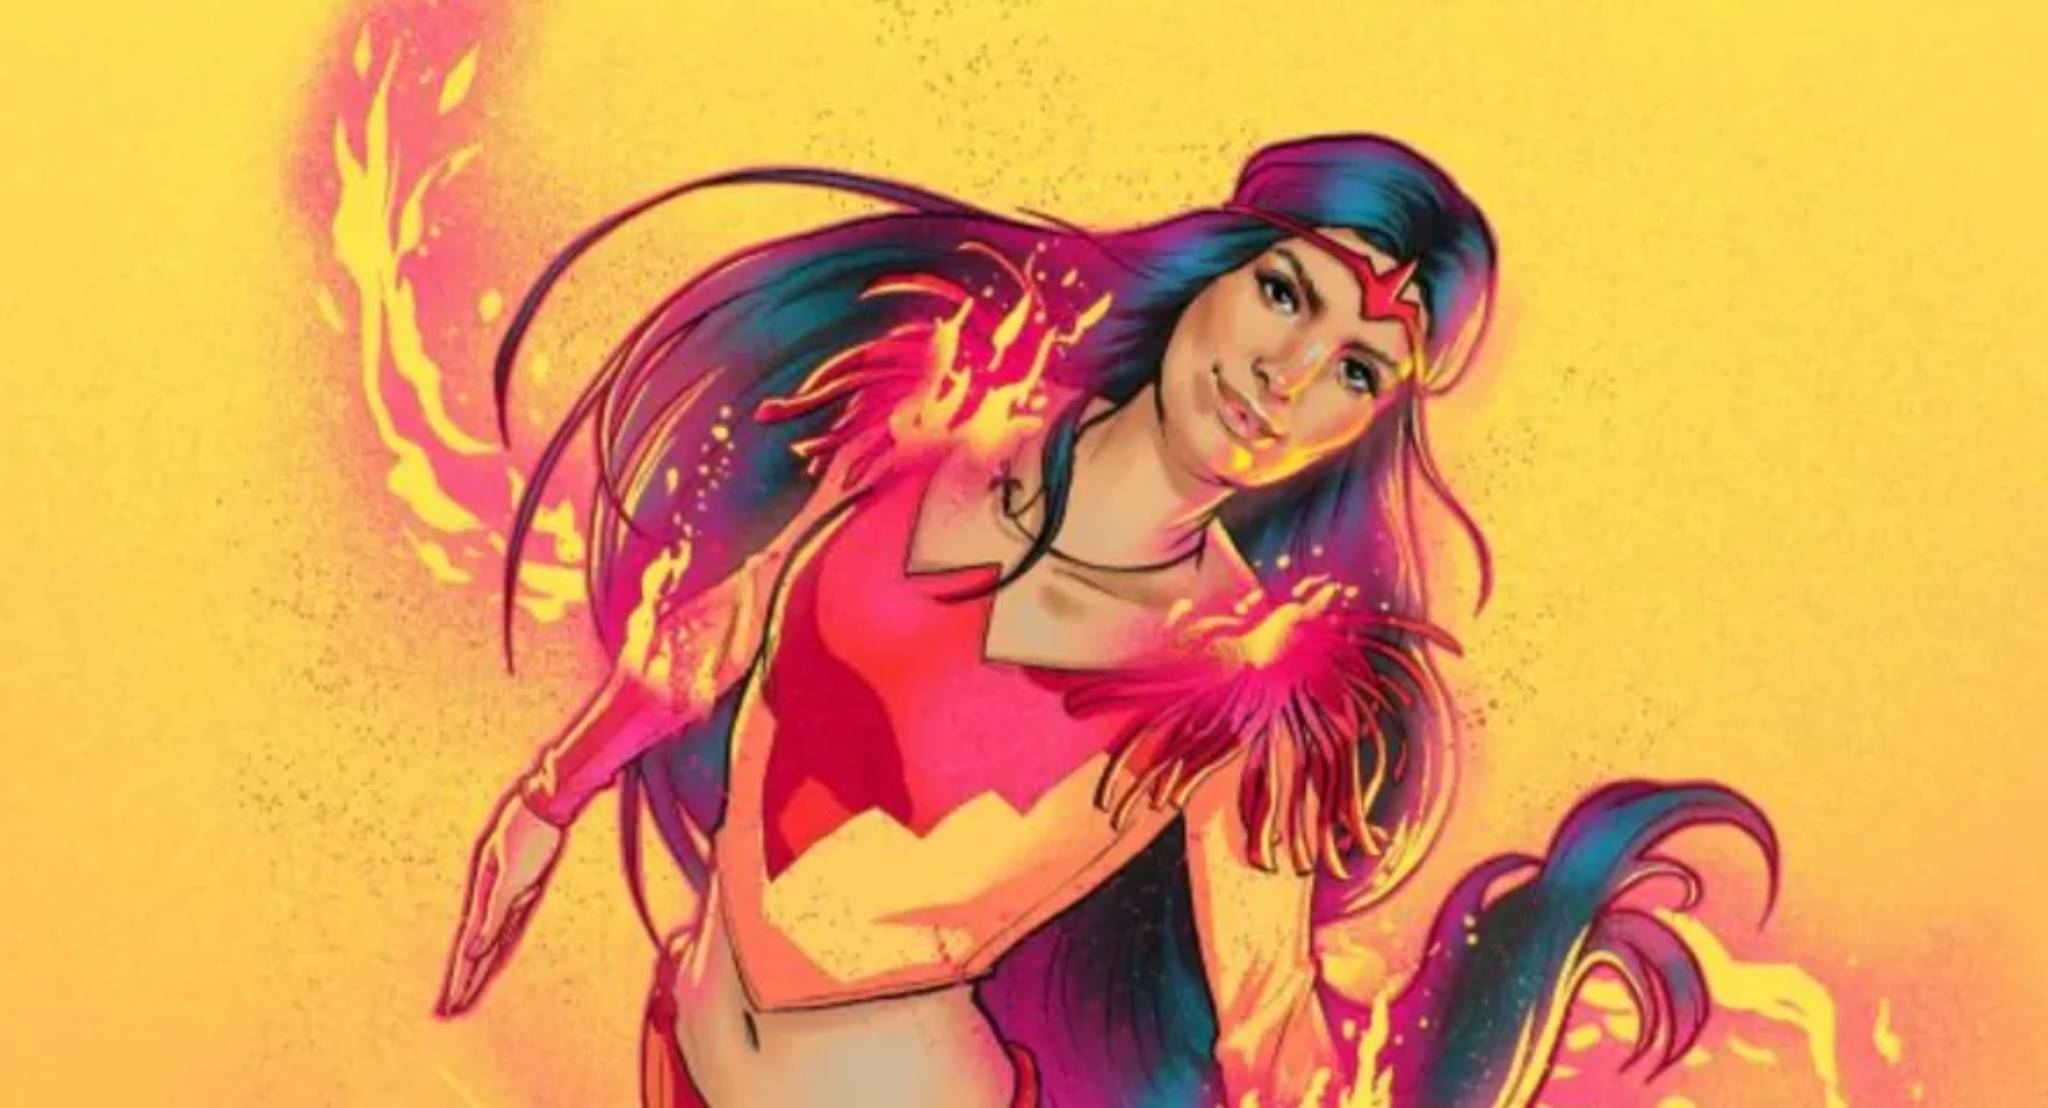 Marvel Comics unveils covers for Hispanic Heritage Month